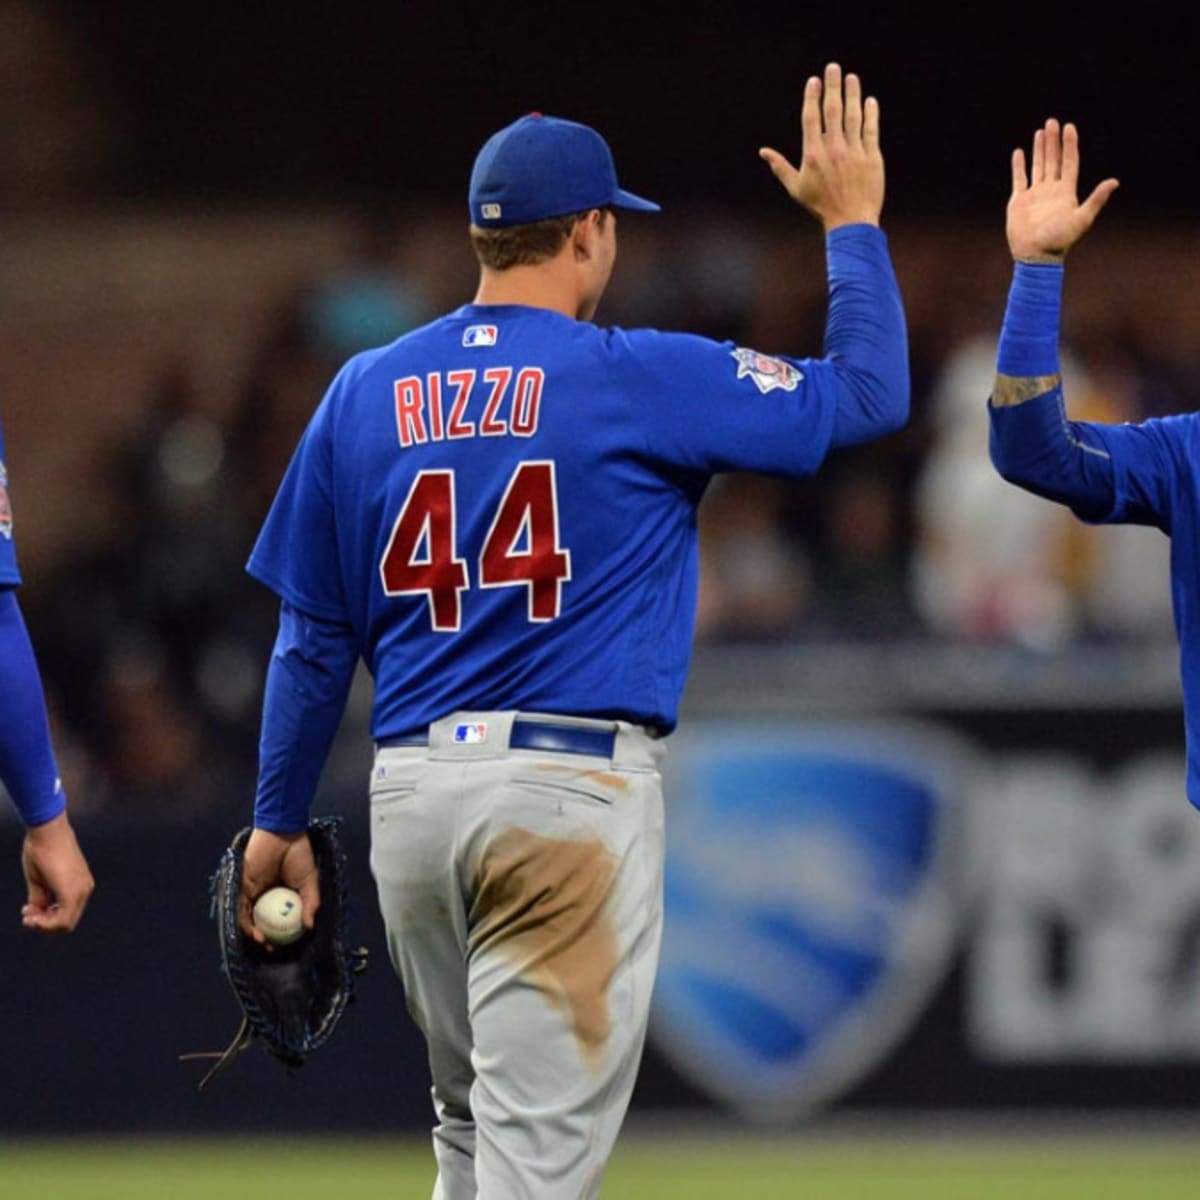 SportsClick: Who is your favorite player to play for both the Cubs